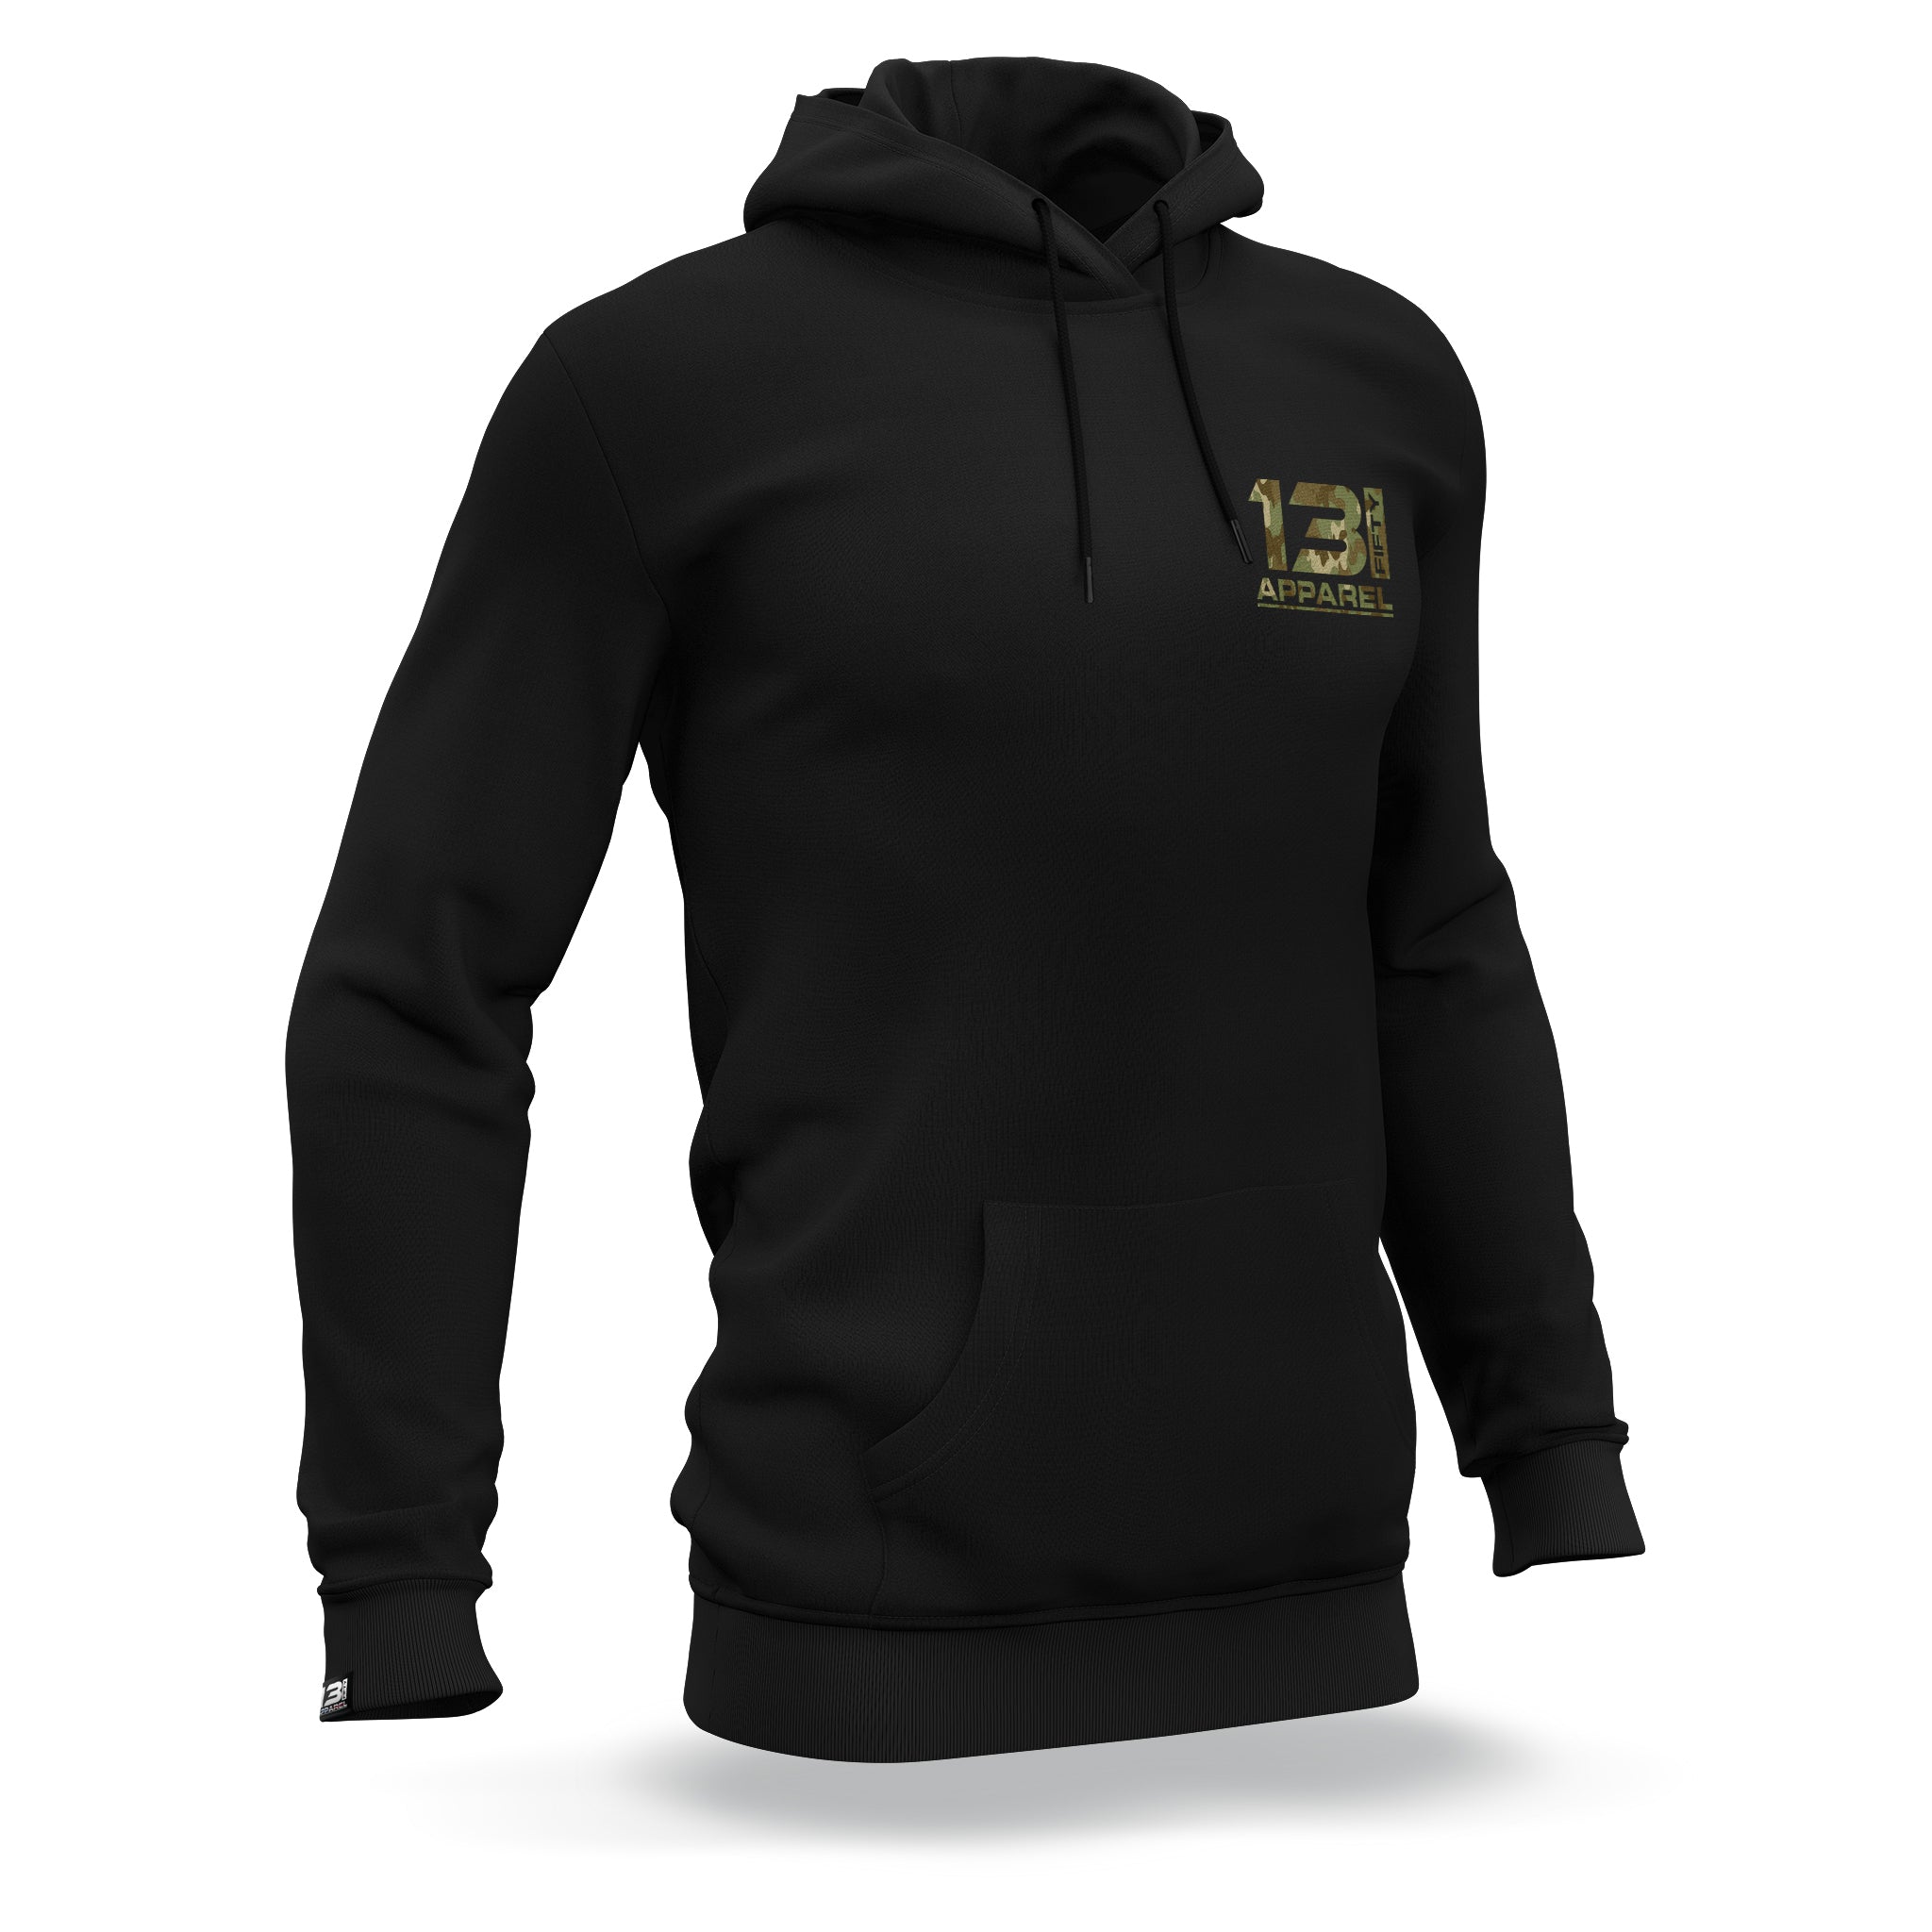 13 Fifty Apparel | Men's Products | 13 Fifty Apparel